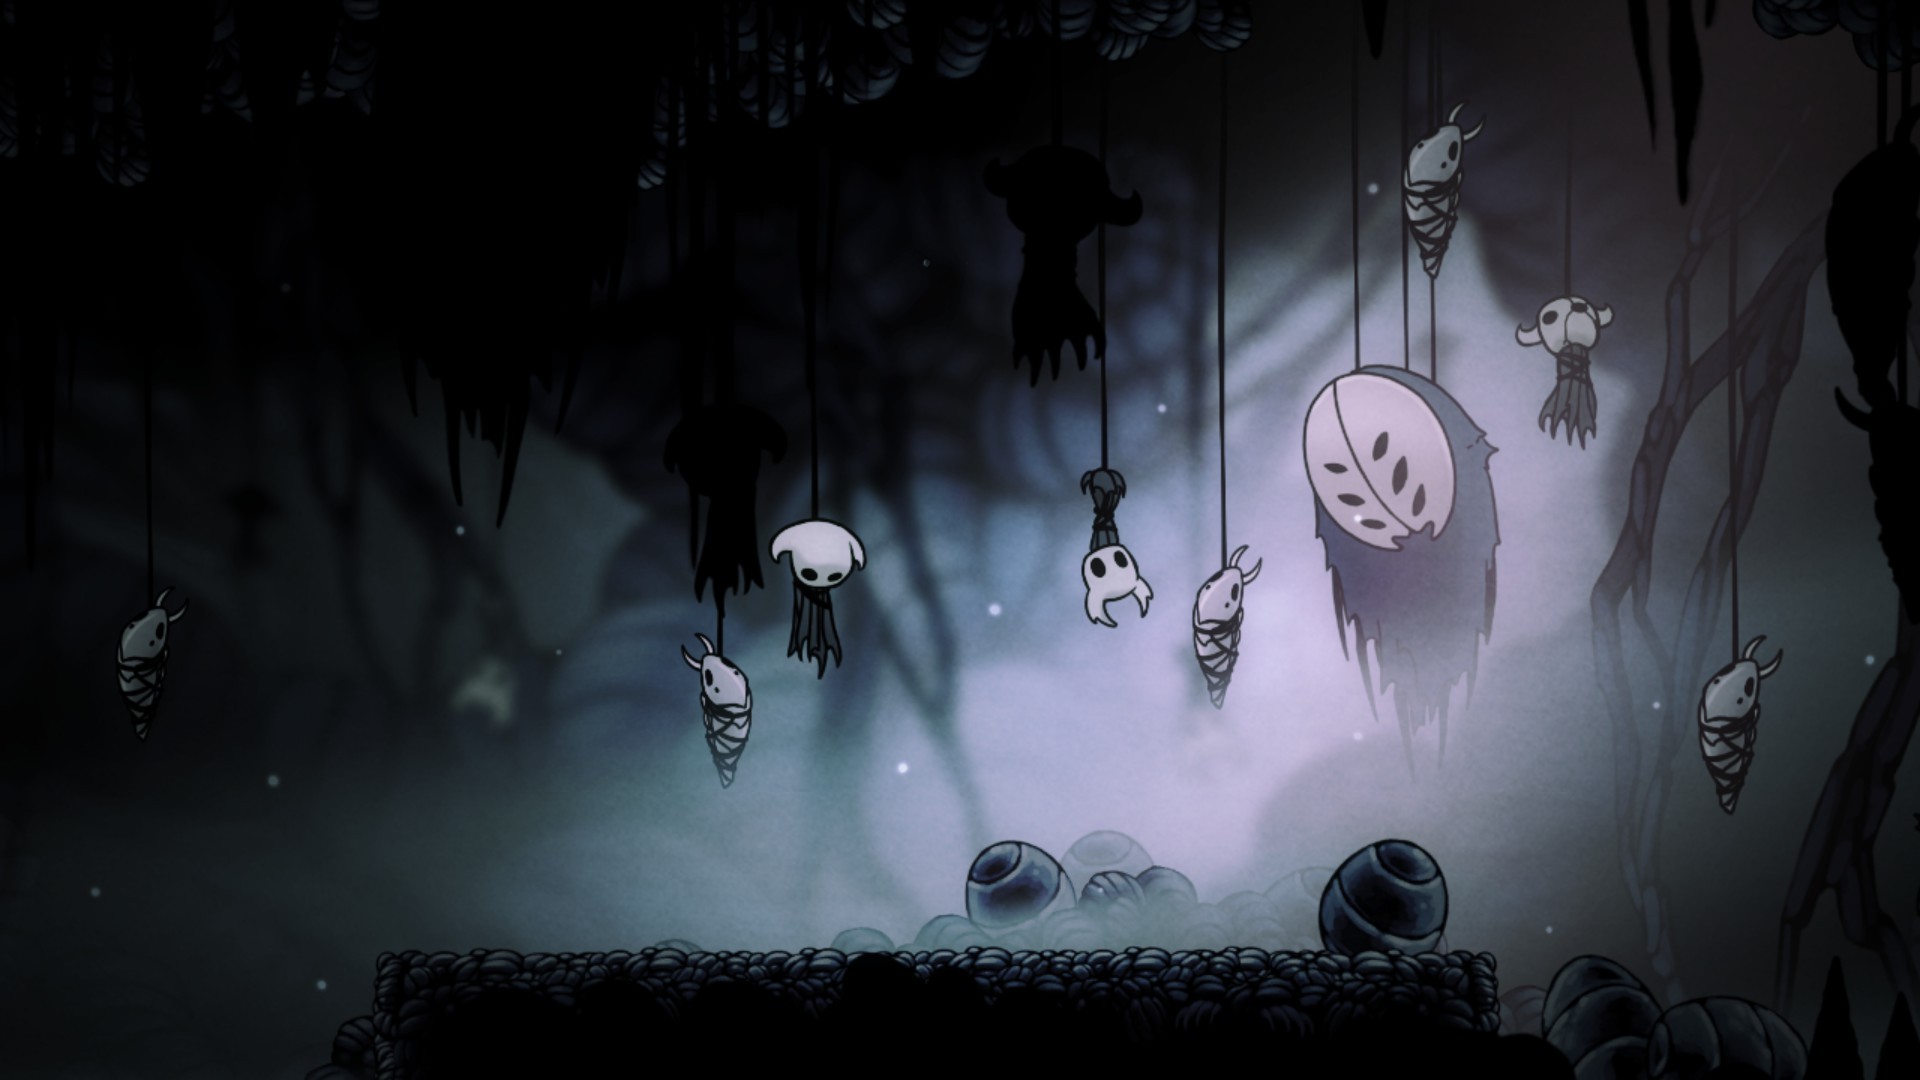 HD Hollow Knight Gameplay Backgrounds with high-resolution 1920x1080 pixel. You can use this wallpaper for your Windows and Mac OS computers as well as your Android and iPhone smartphones